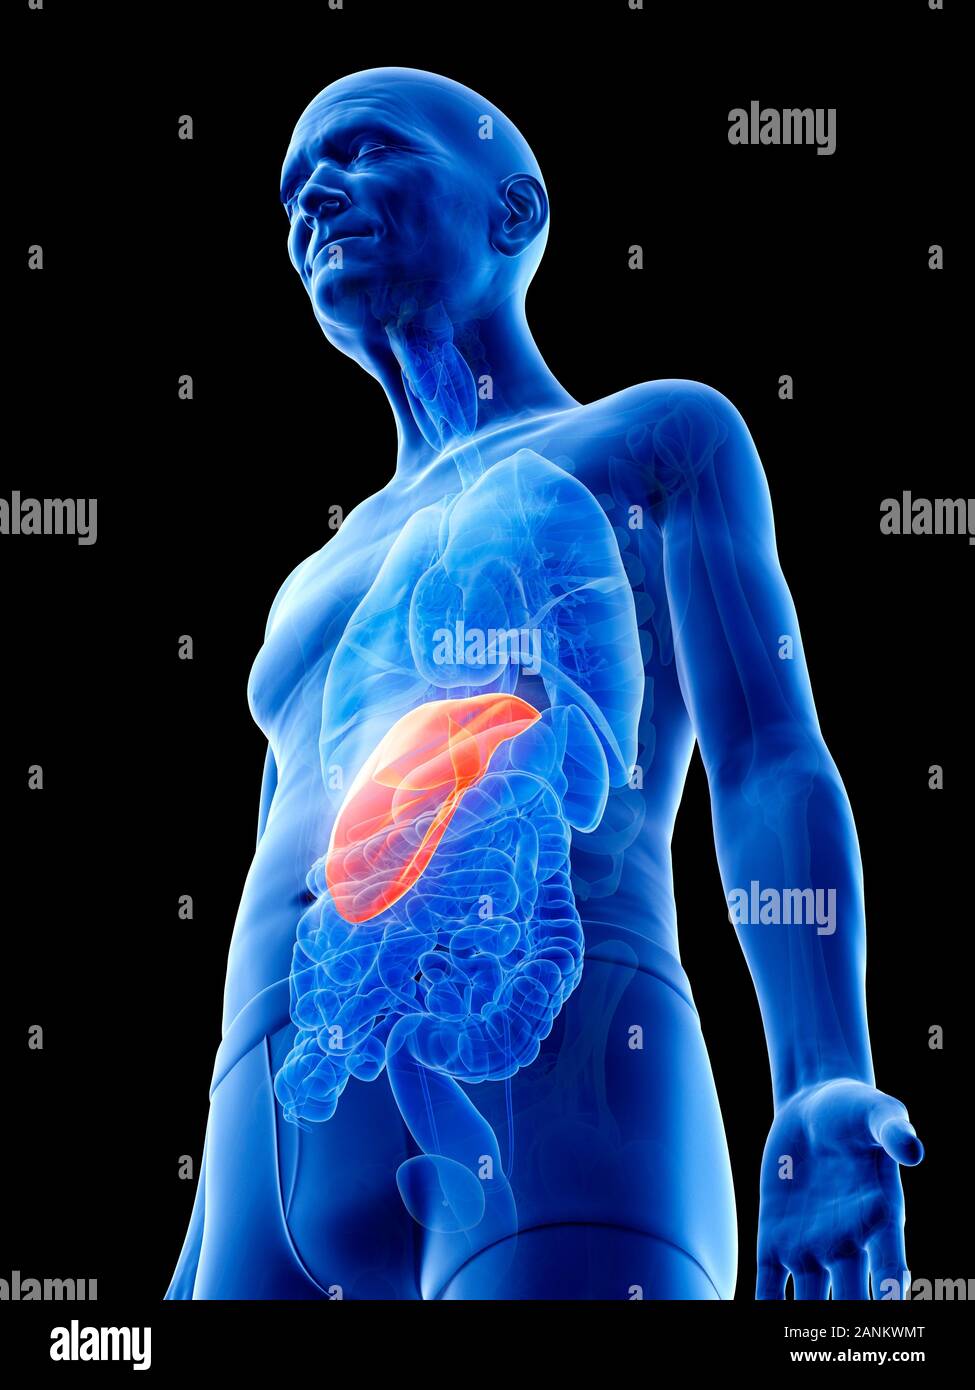 Illustration of an old man's liver Stock Photo - Alamy